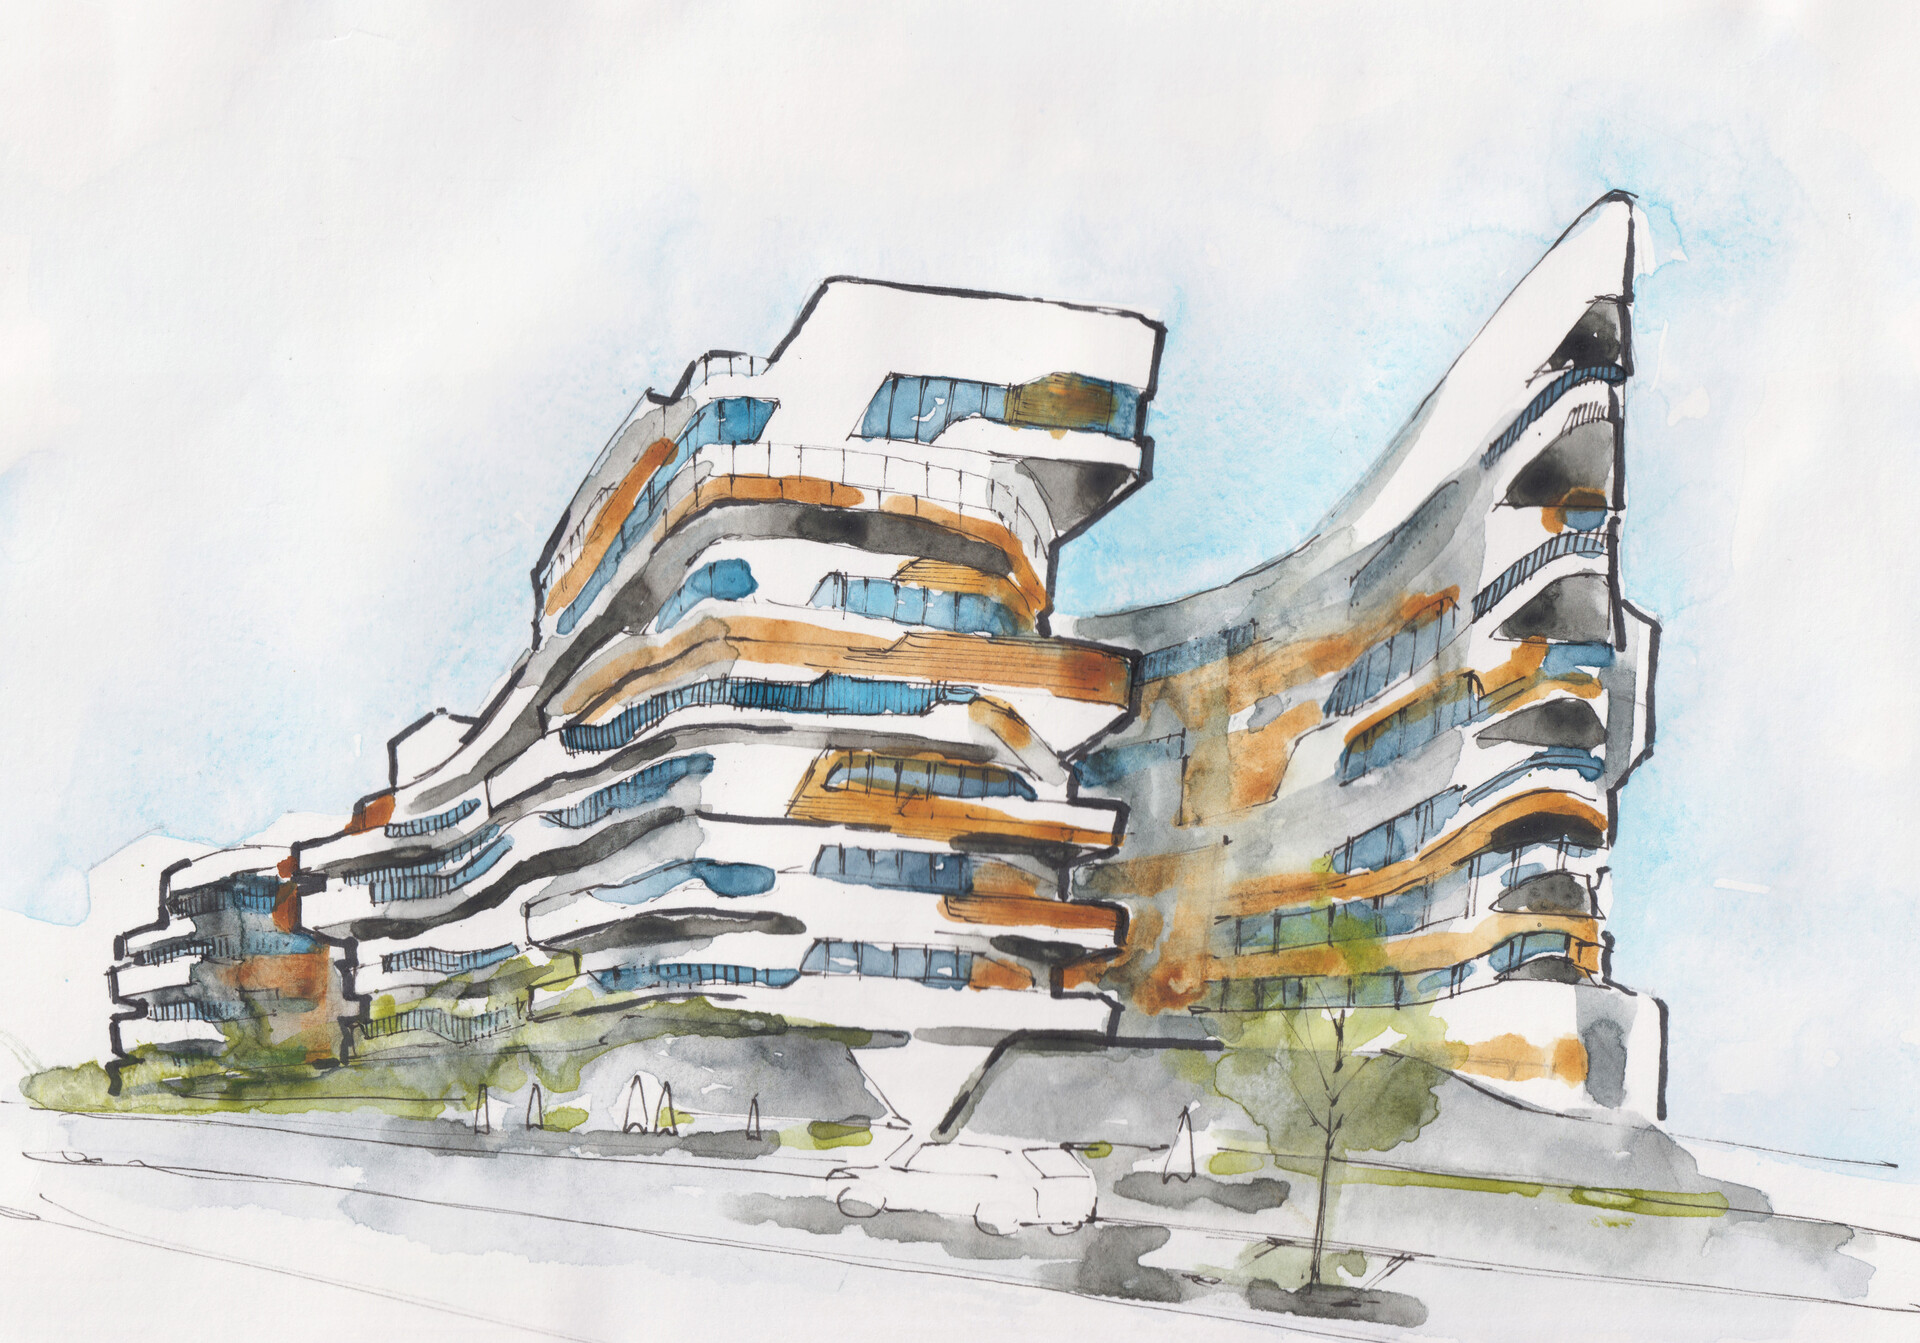 The Cooper Union Shows Sketches from Leading Contemporary Architects |  Architect Magazine